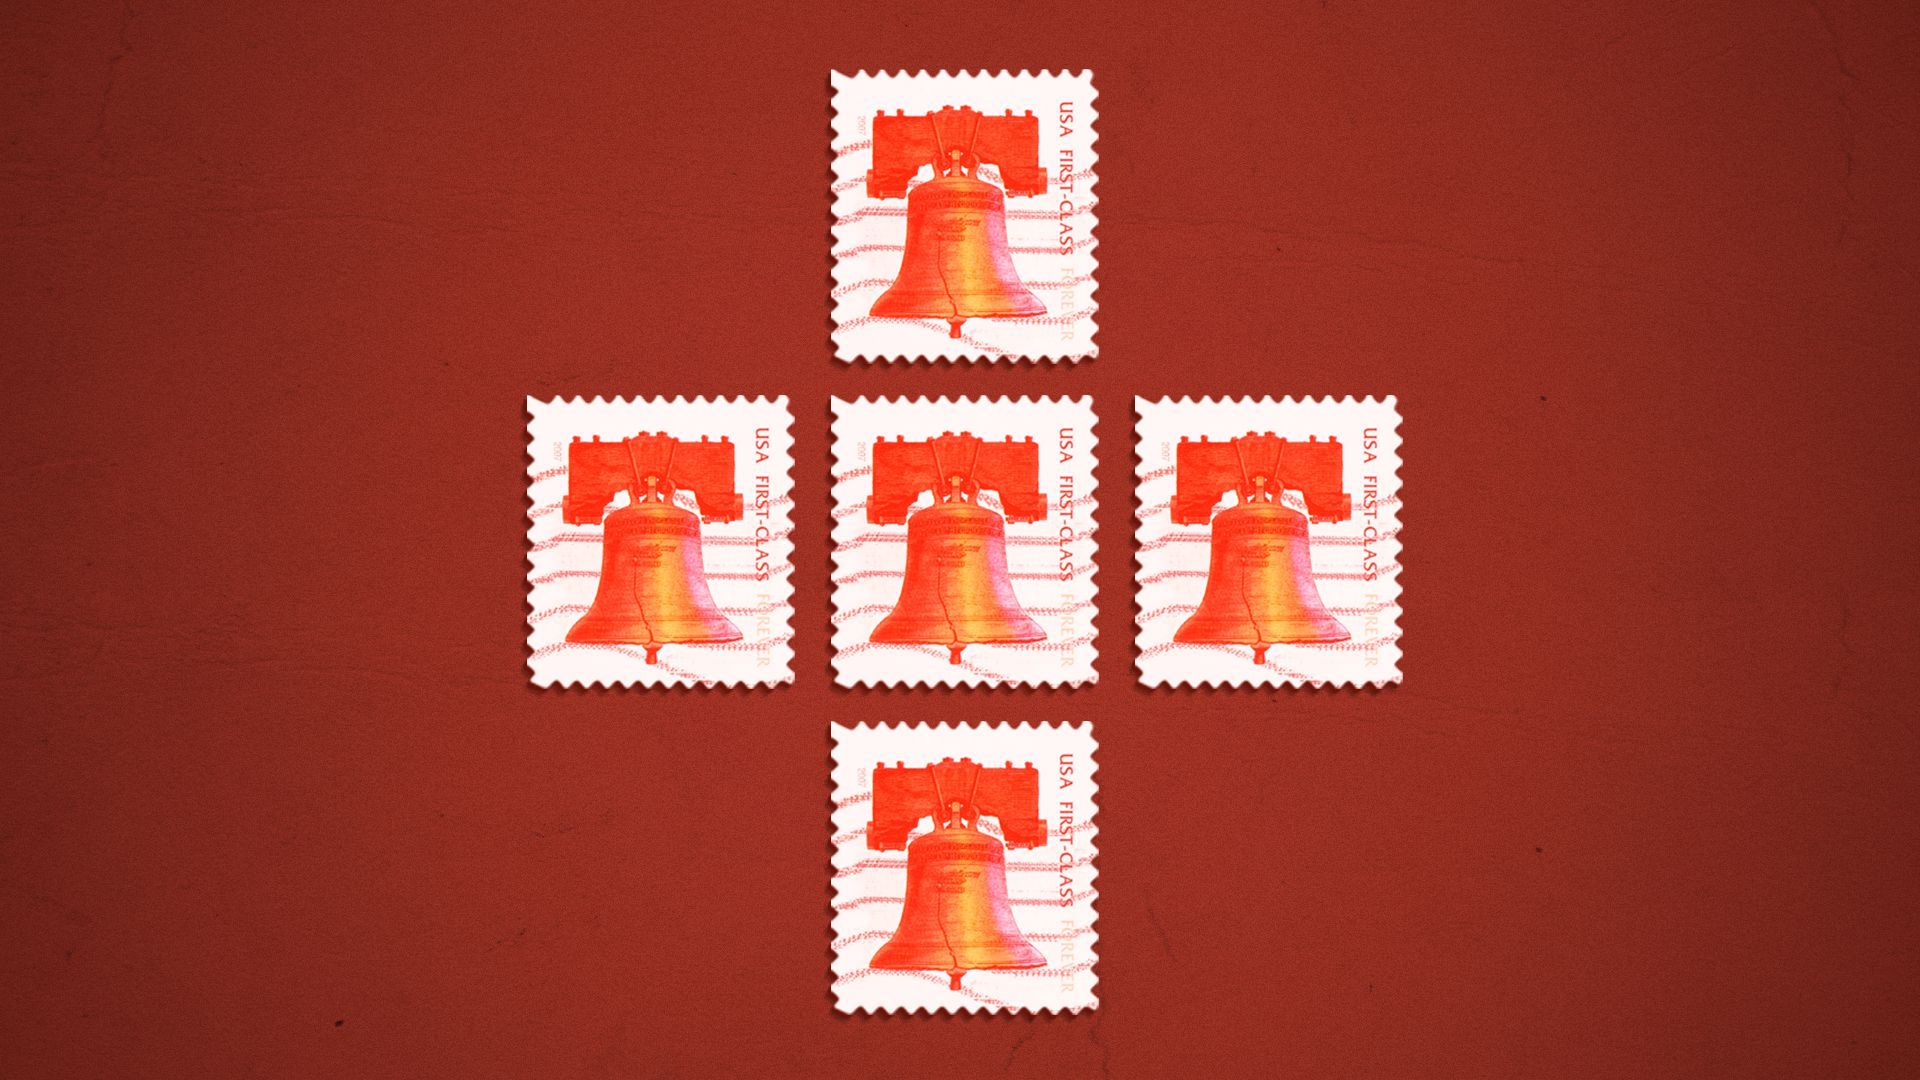 Illustration of a red cross made from stamps.